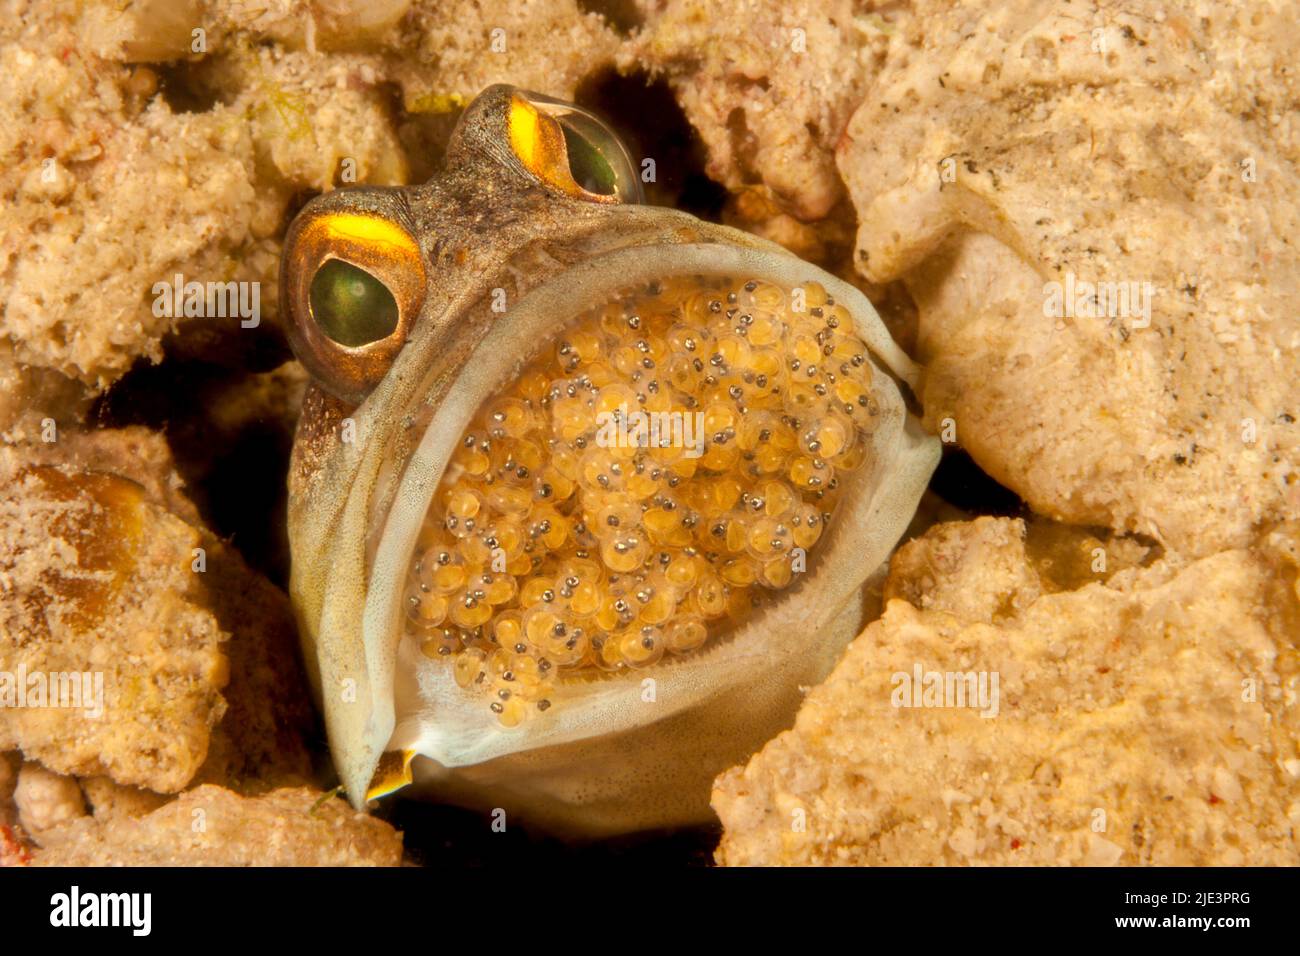 Male gold-specs jawfish, Opistognathus randalli, with mouth brooding eggs, also known as the yellow barred jawfish, Mabul Island, Malaysia. The eyes c Stock Photo